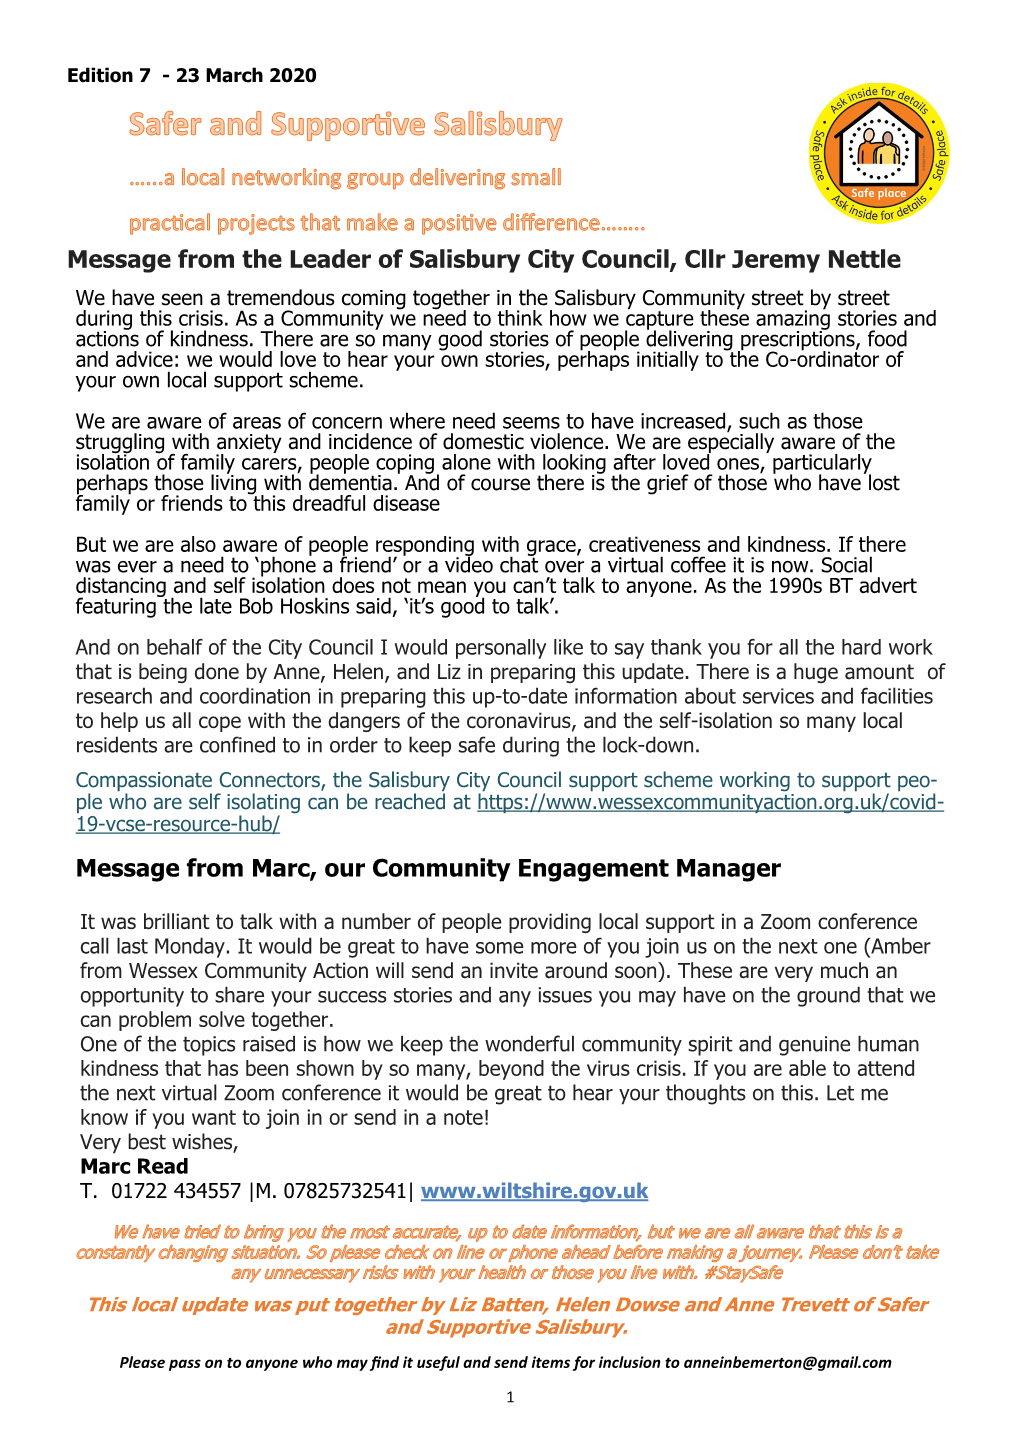 Message from the Leader of Salisbury City Council, Cllr Jeremy Nettle